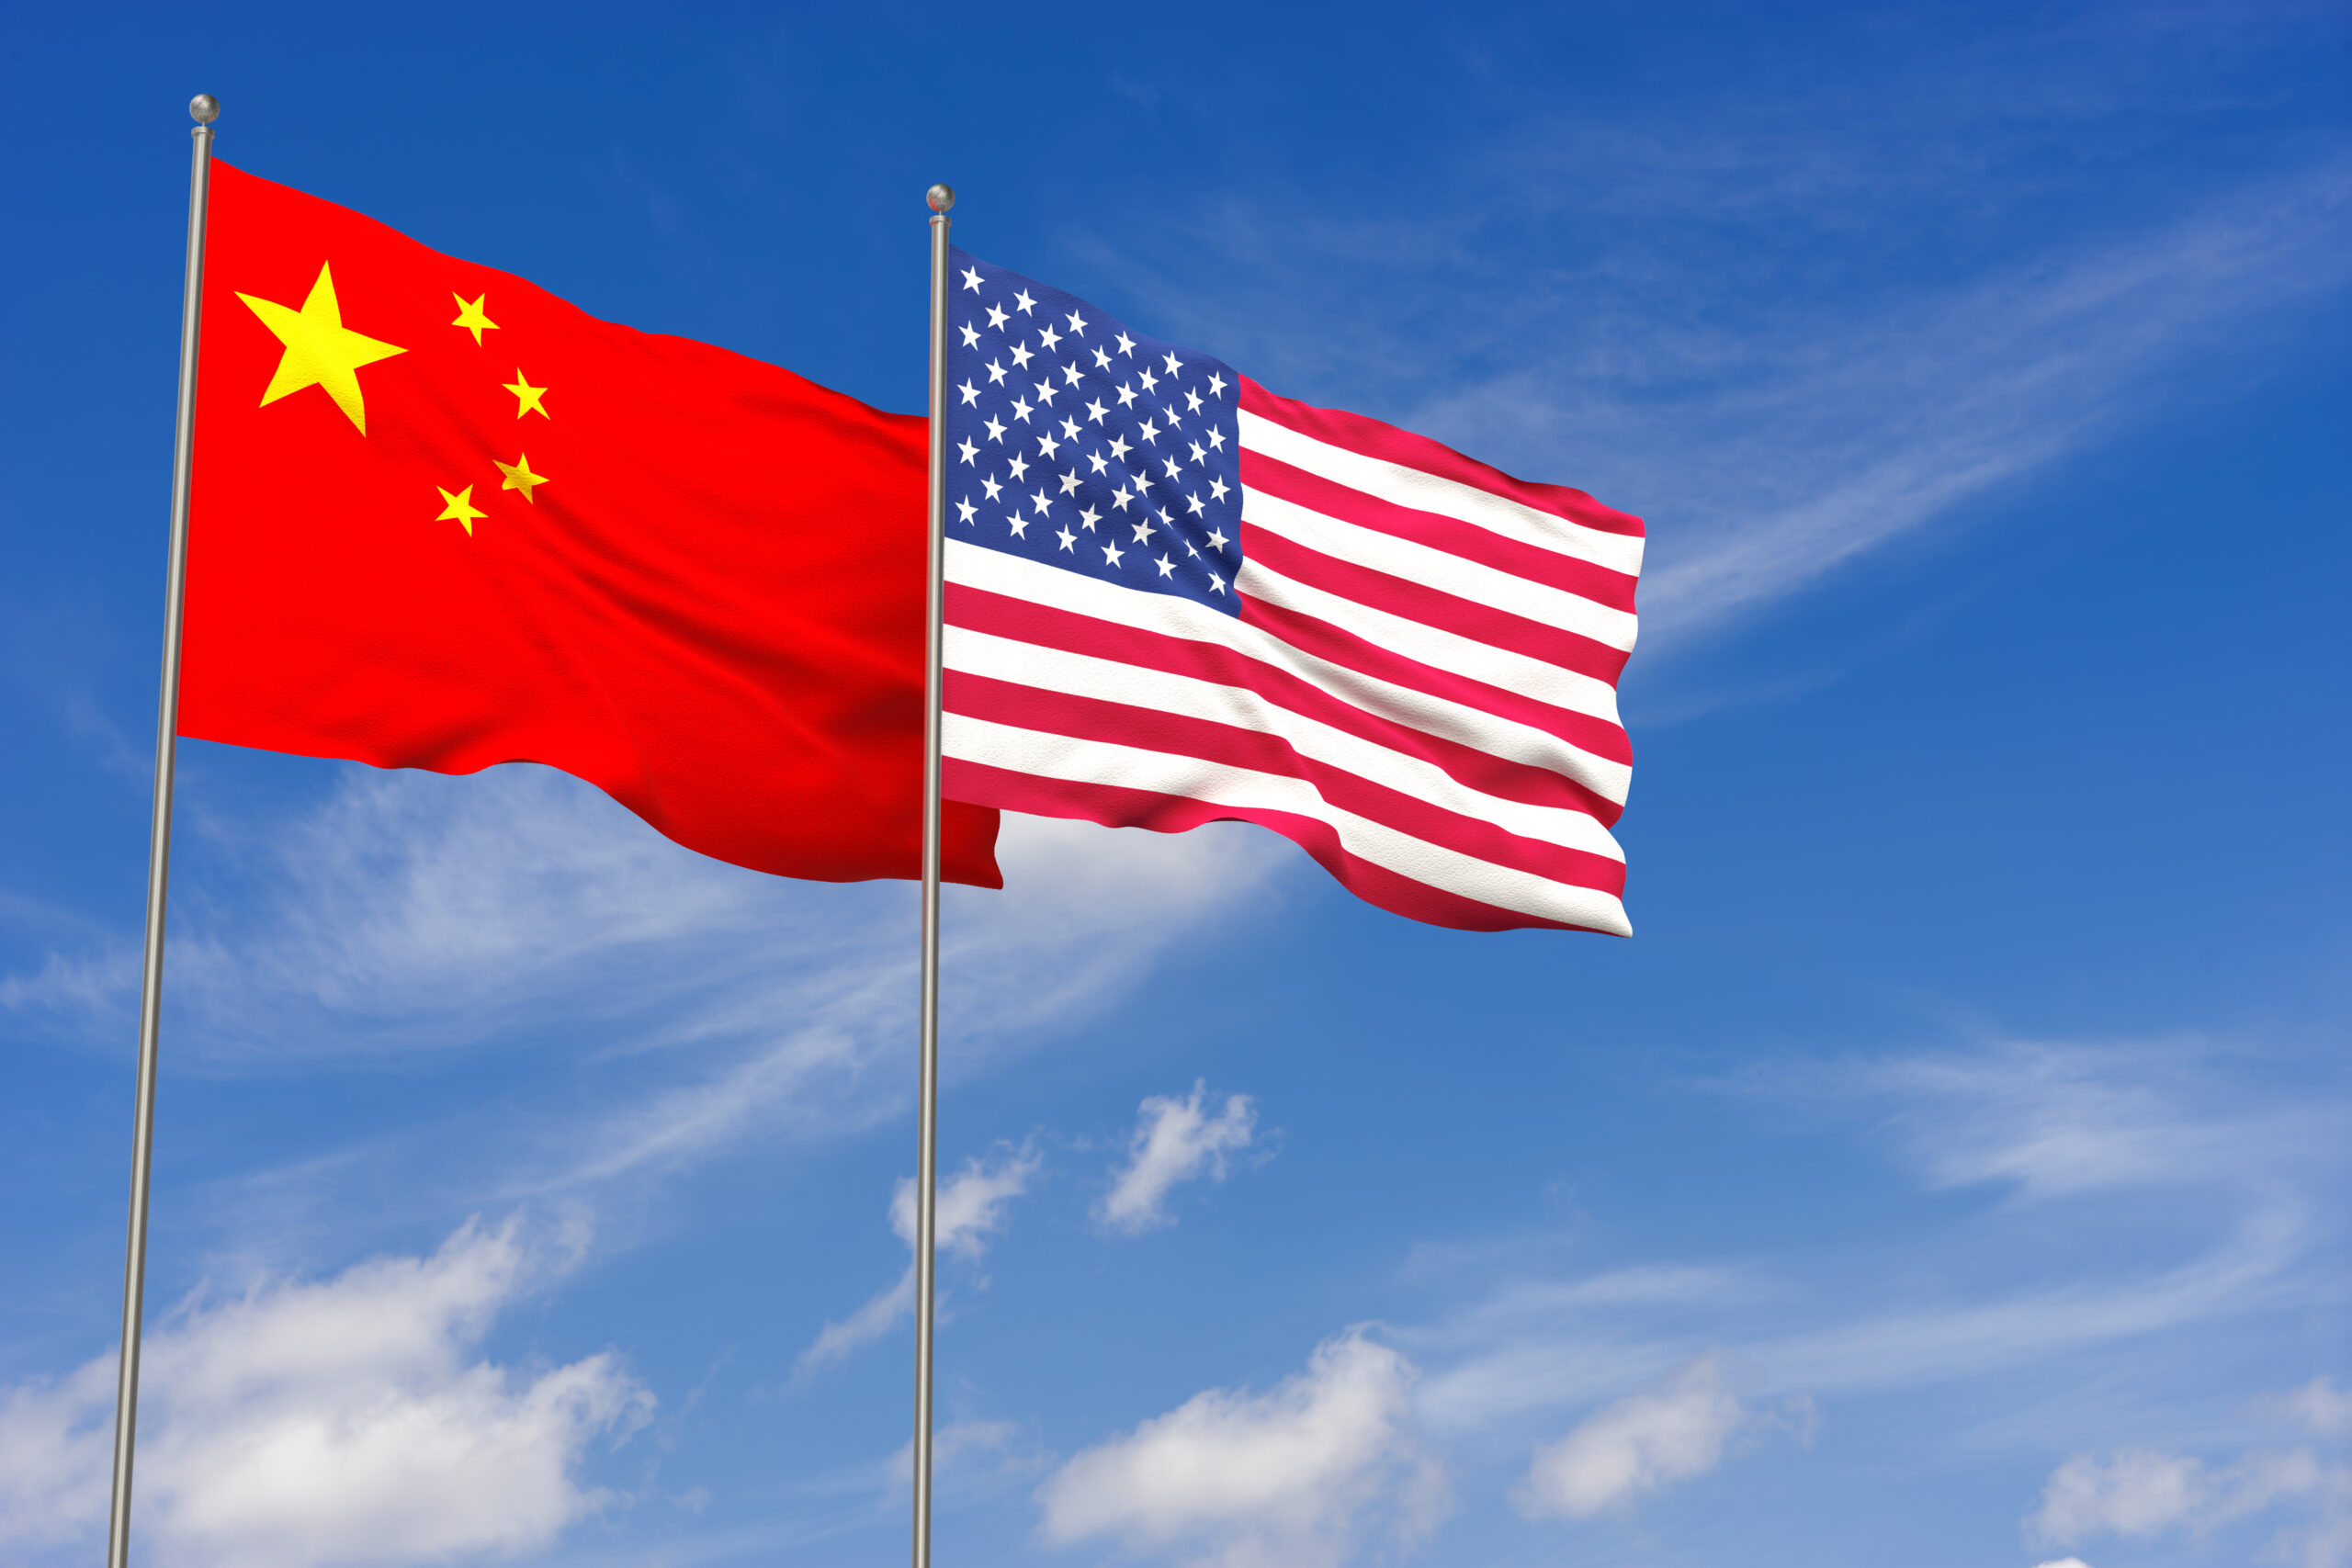 China and USA flags over blue sky background